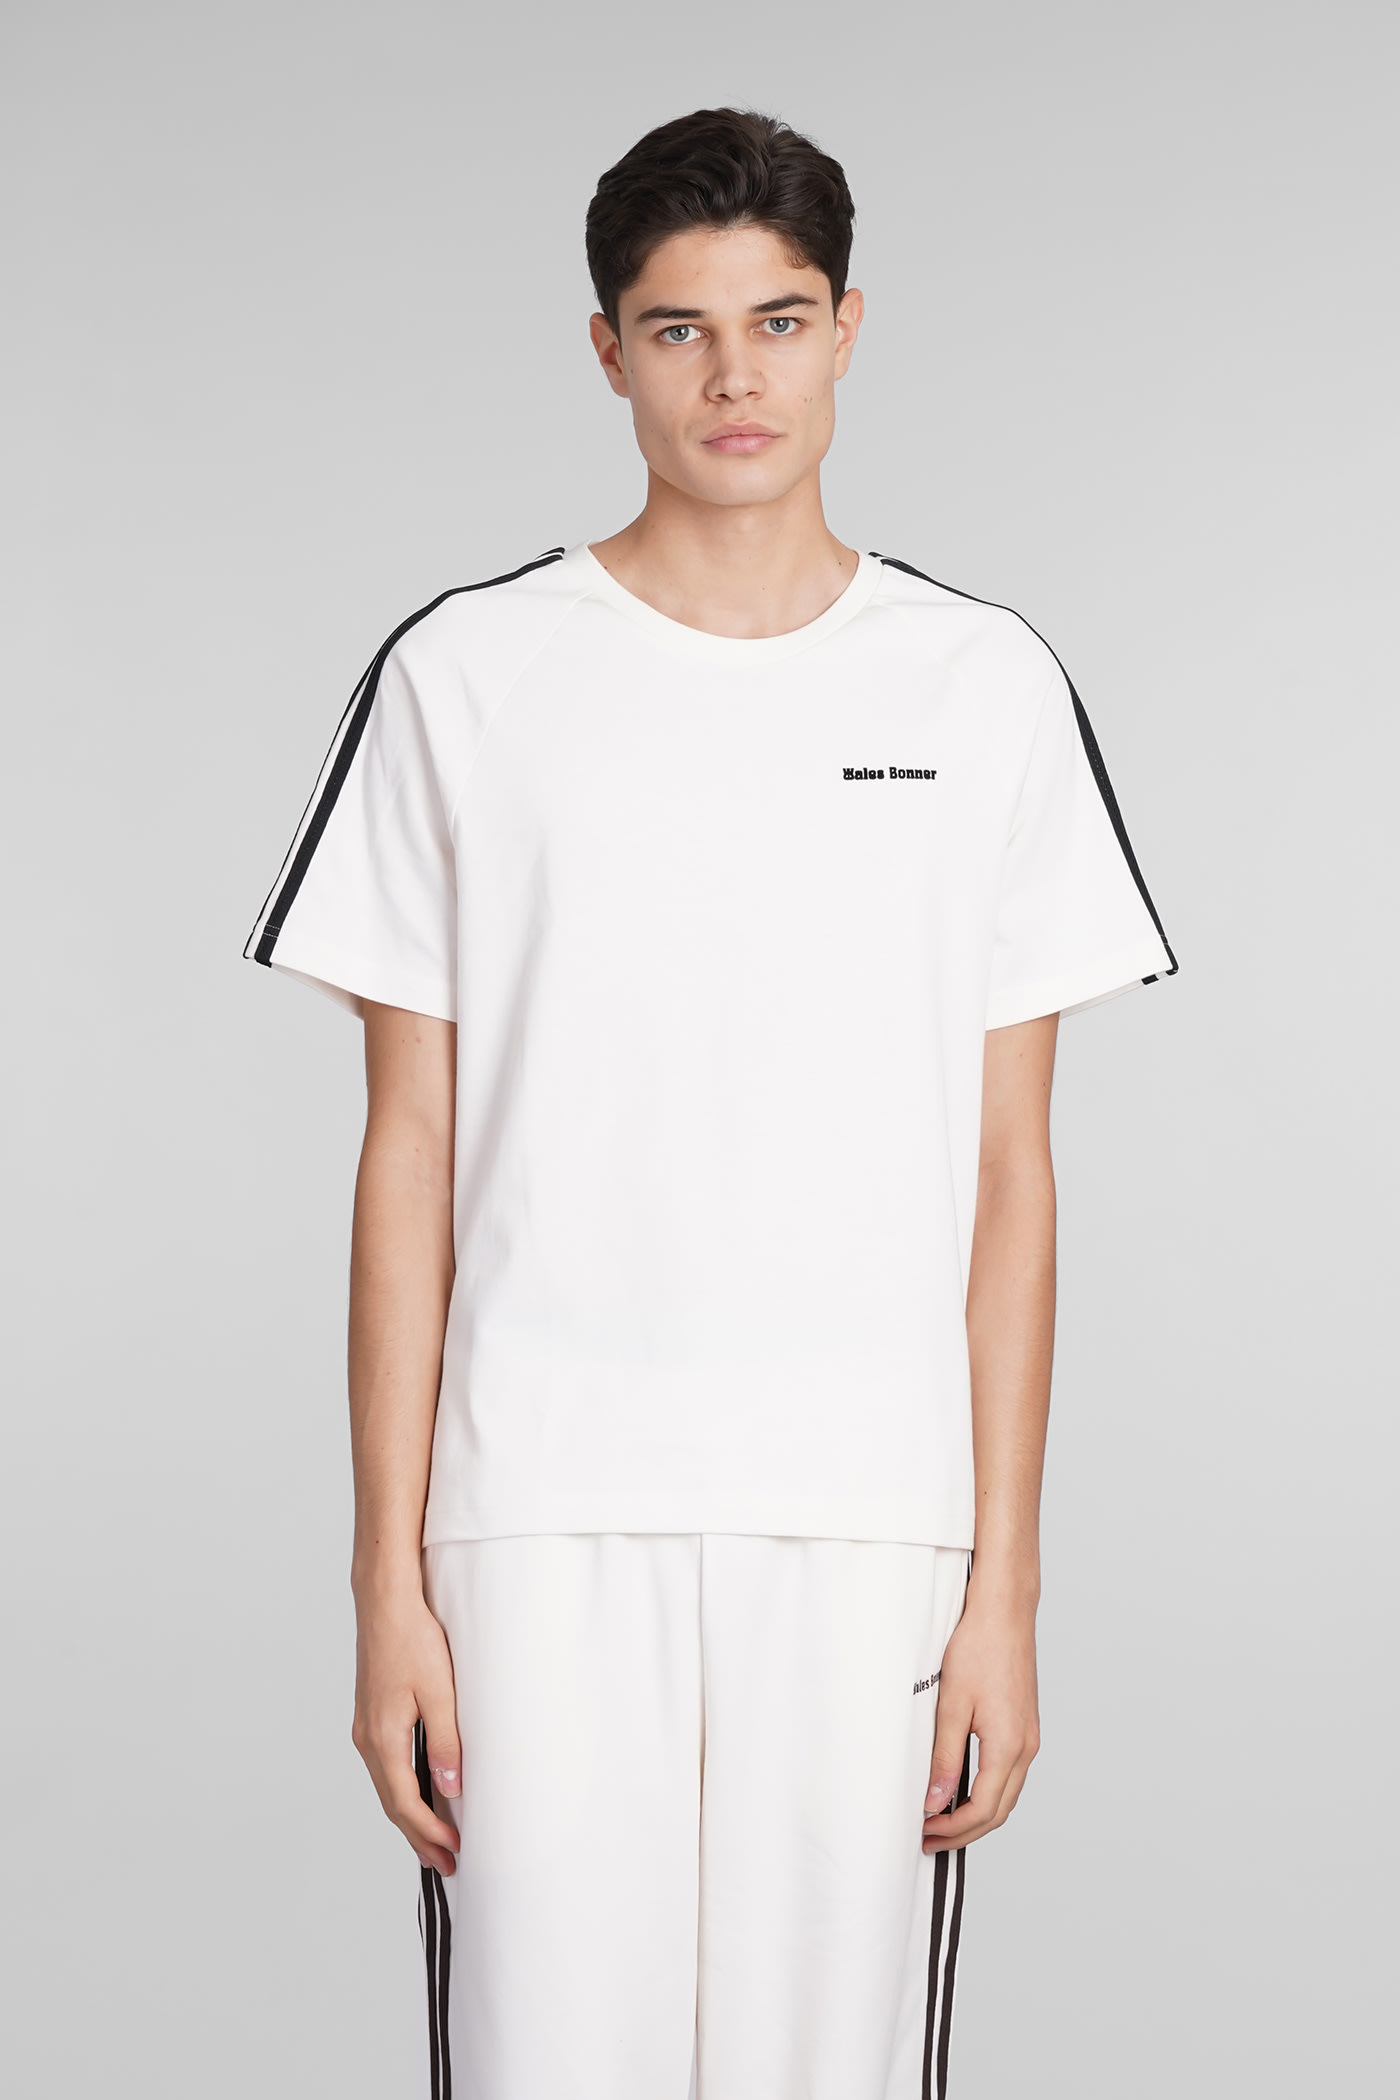 ADIDAS ORIGINALS BY WALES BONNER T-SHIRT IN WHITE COTTON